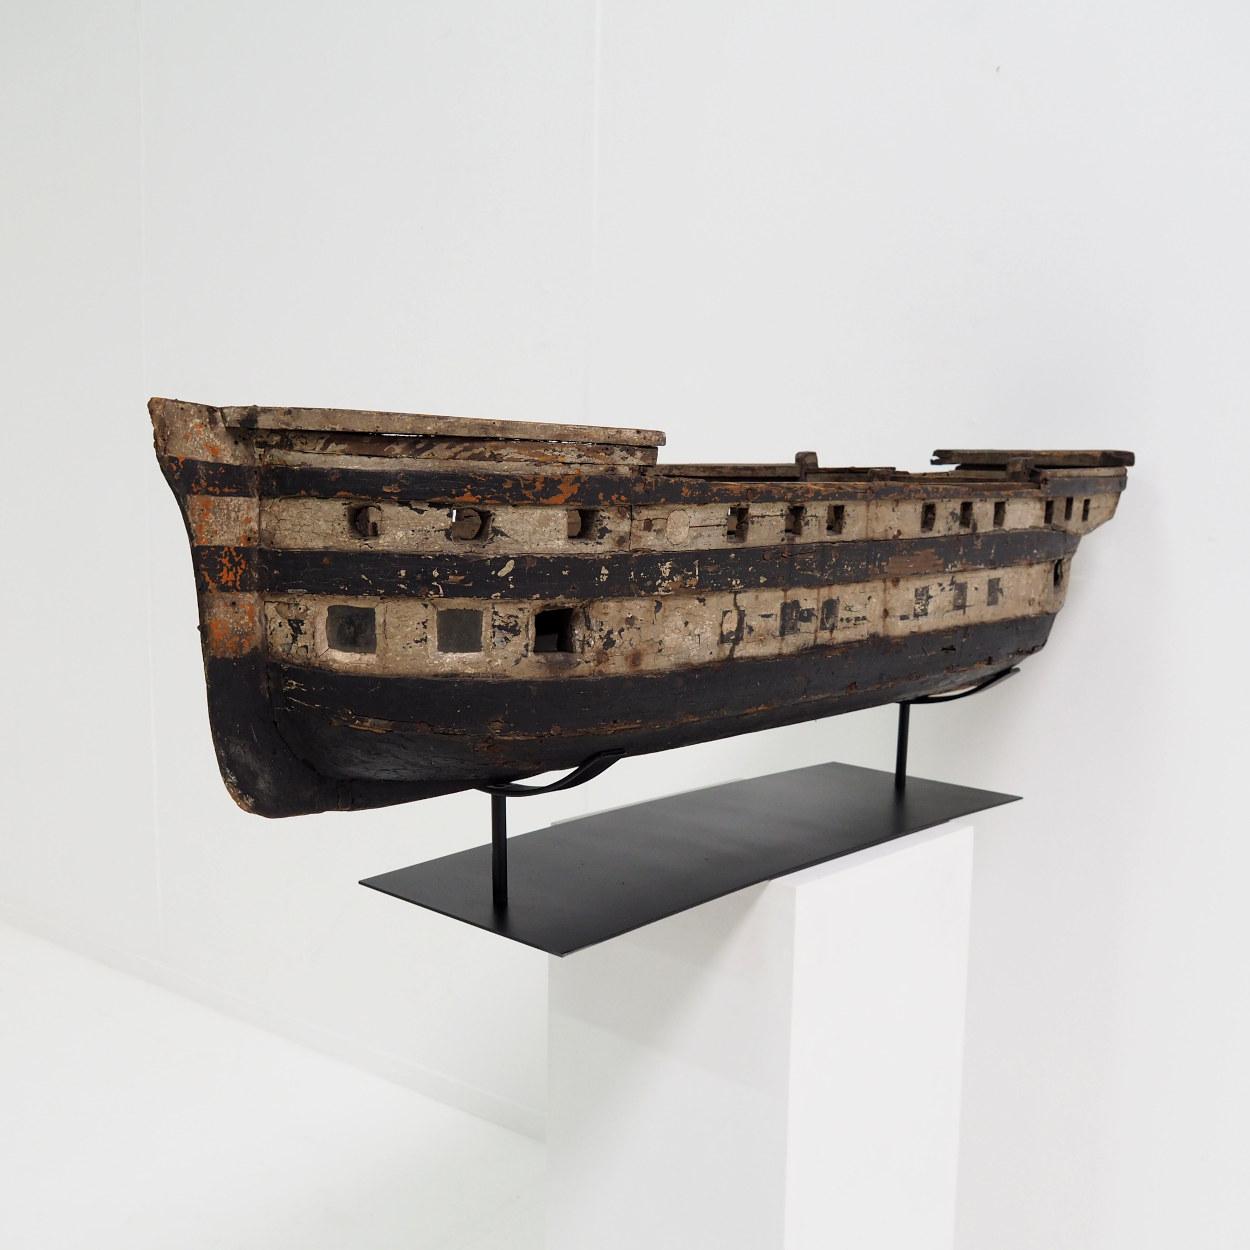 Beautiful antique ship model made of different types of painted wood.
It was most likely made as a toy as we can tell by the less detailed construction that mainly gives a general impression. So that would mean that this ship, with extra weight in